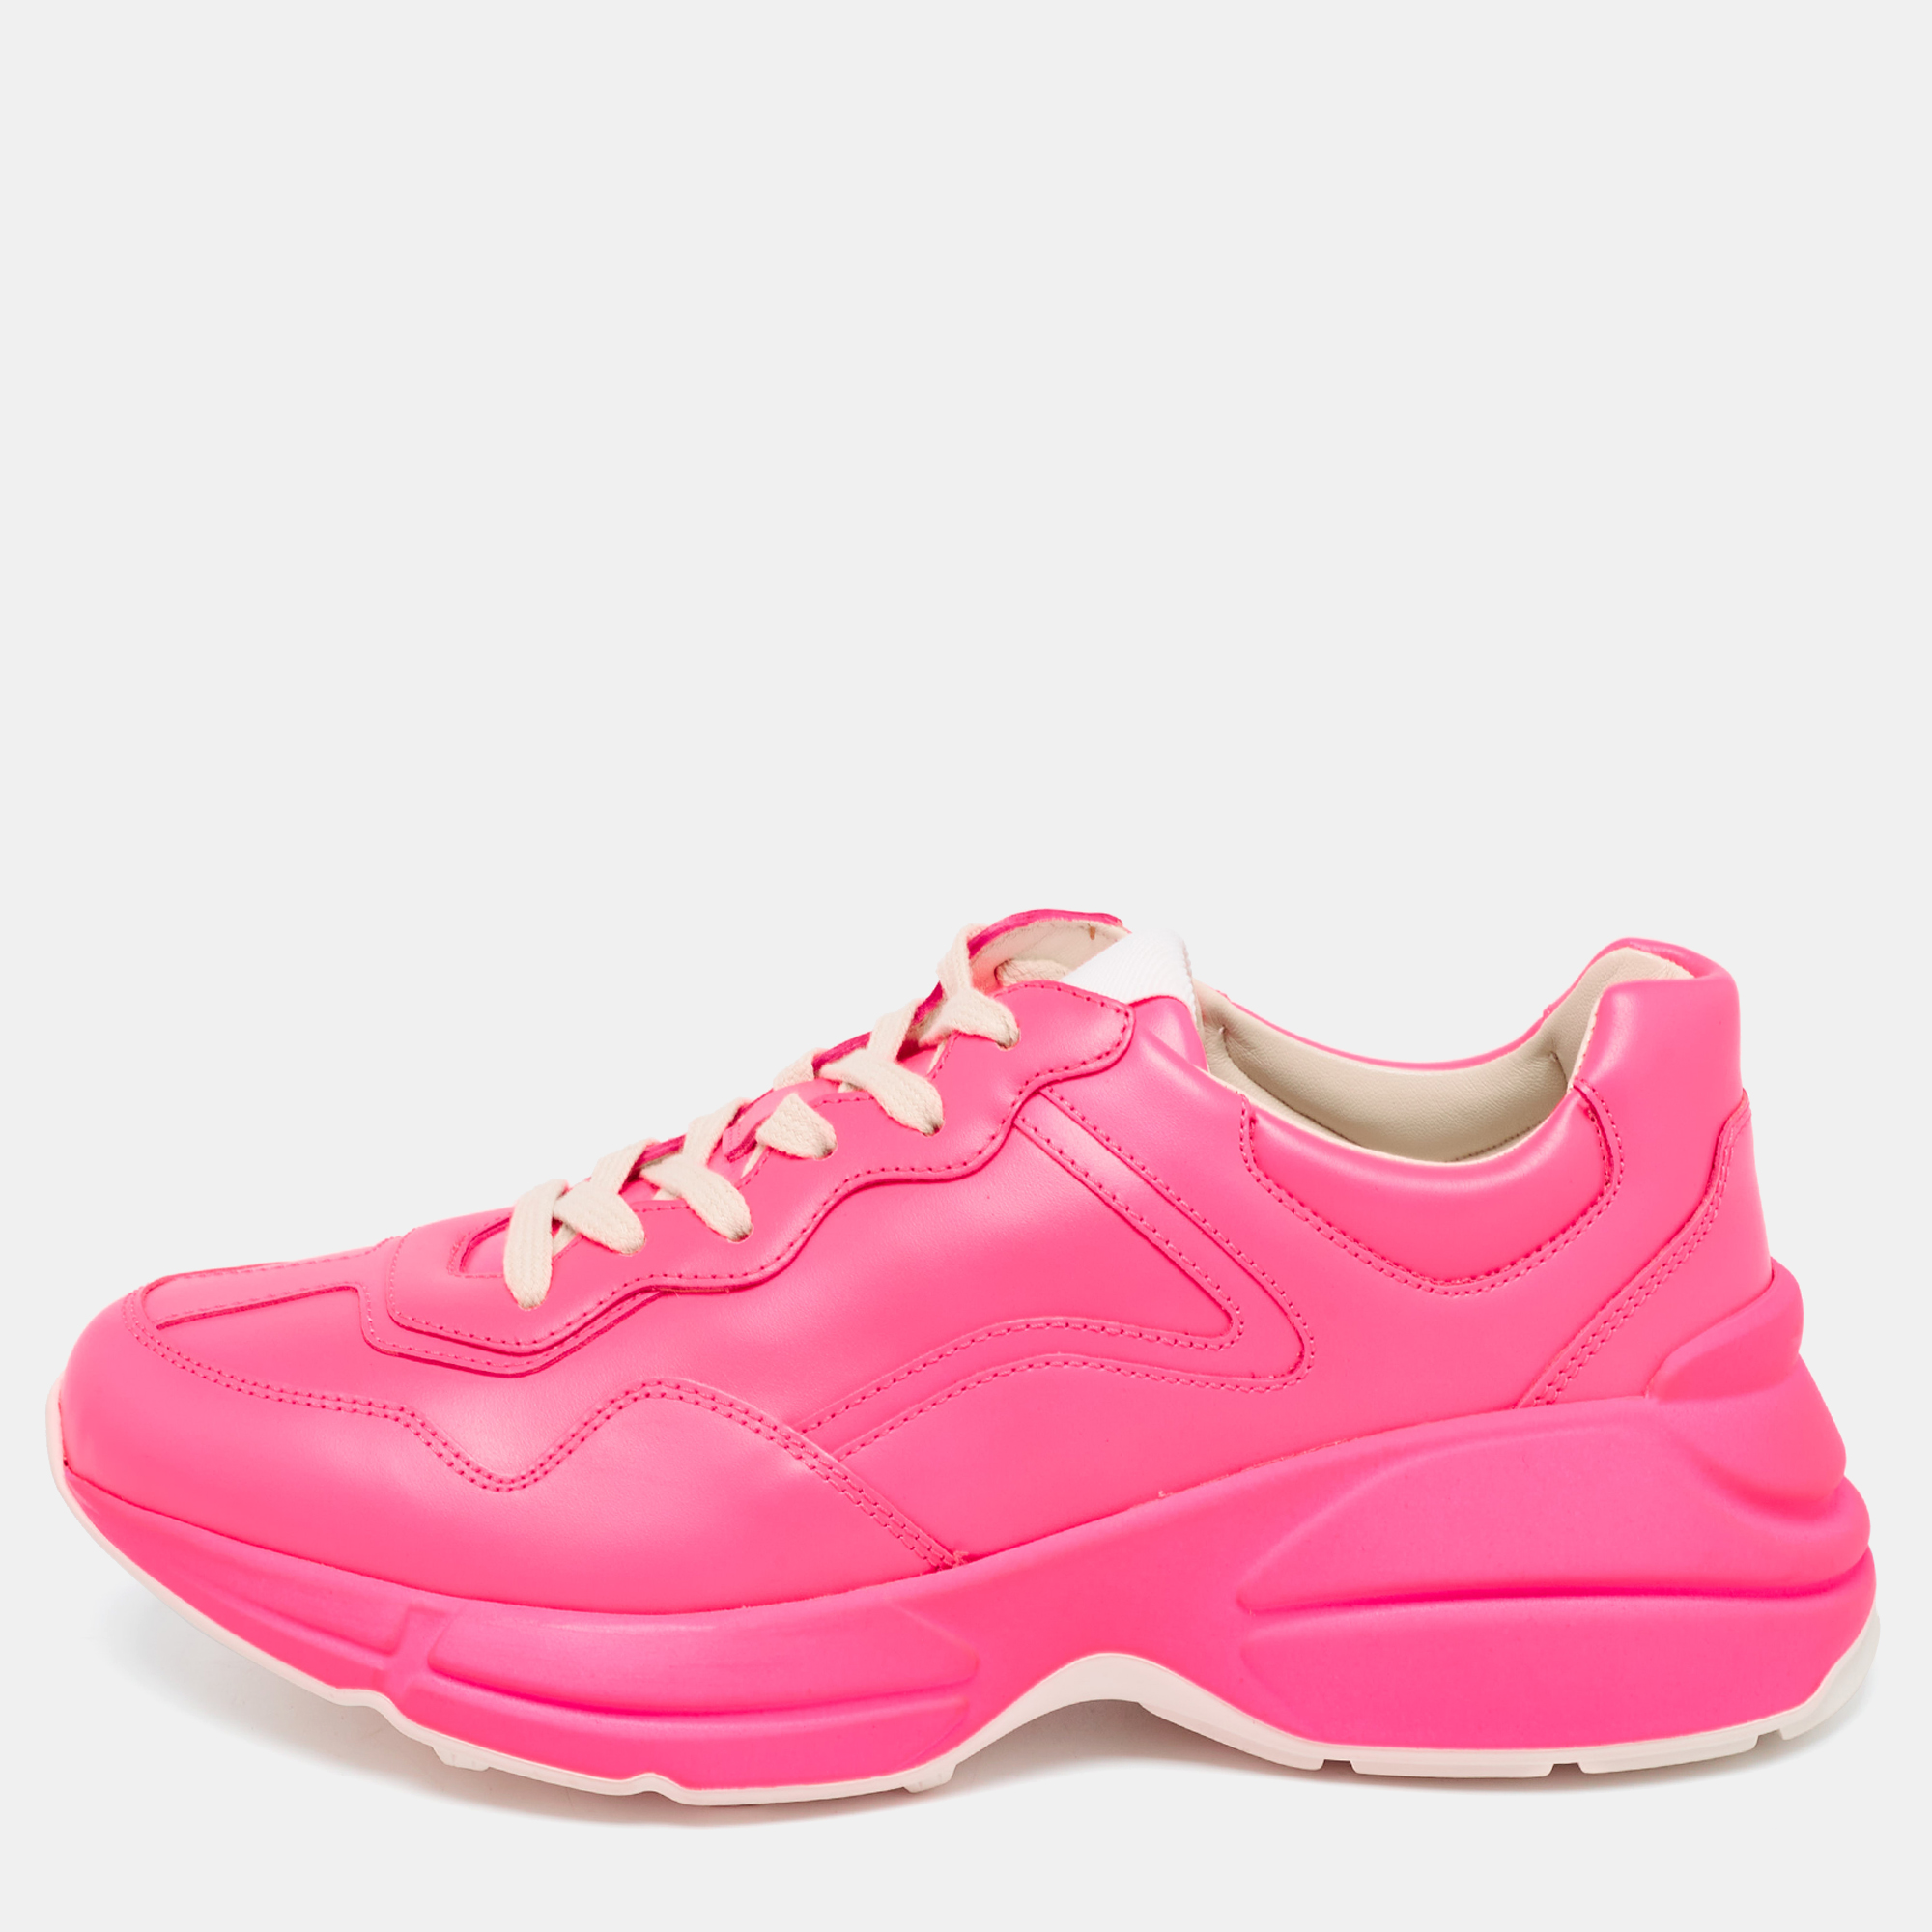 

Gucci Neon Pink Leather Rhyton Sneakers Size